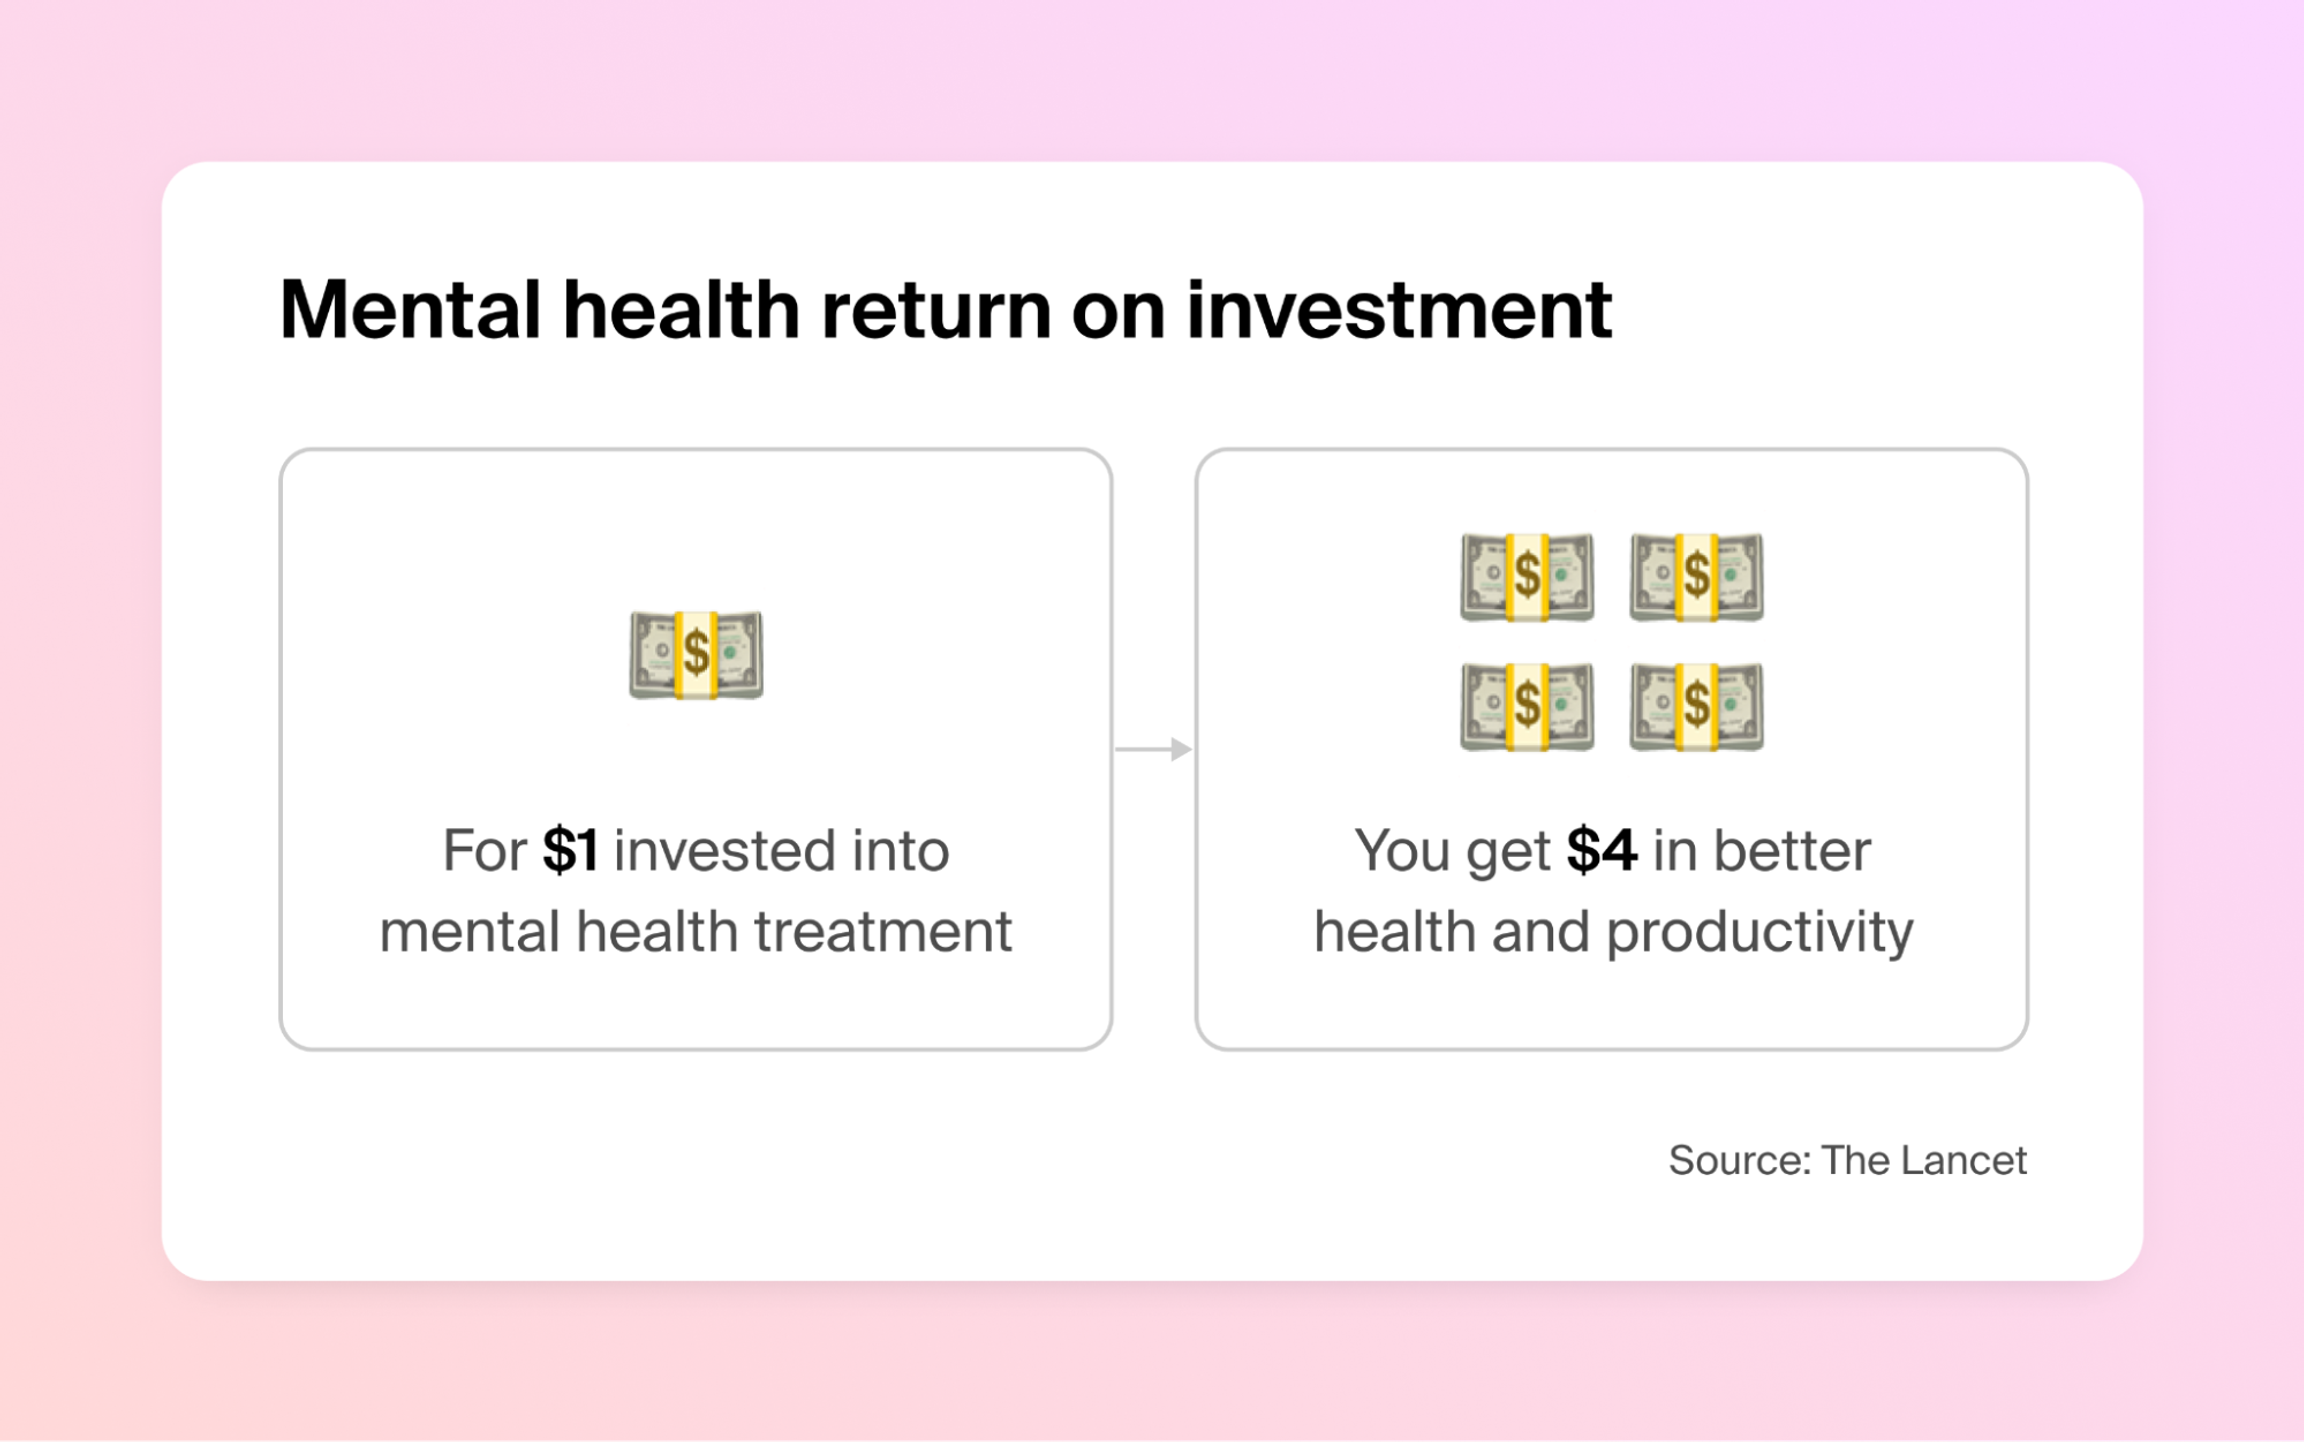 Screenshot of Survey Result Conducted by The Lancet about Mental Health Return on Investment